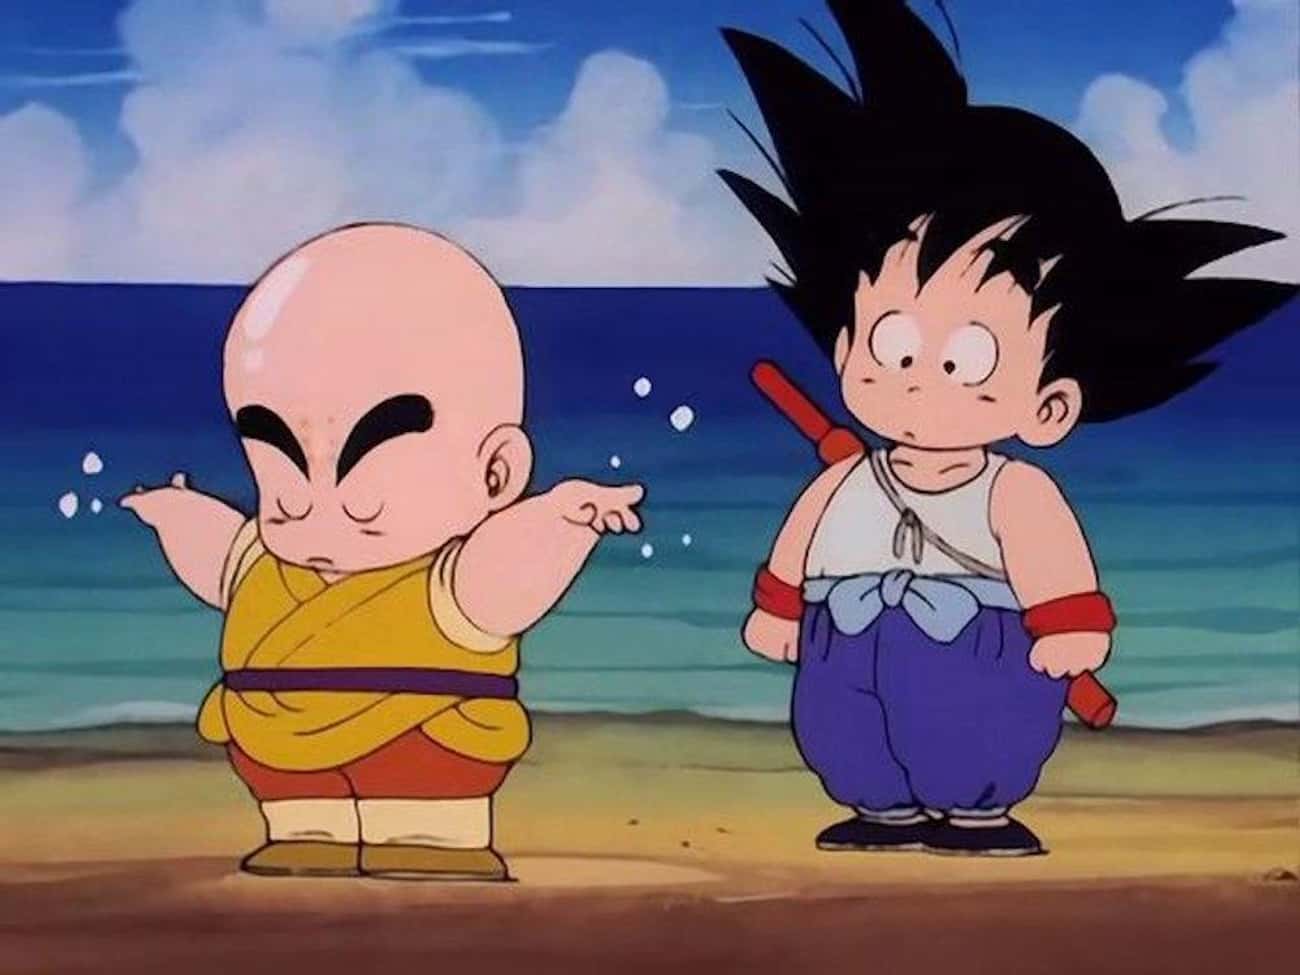 Krillin Was Introduced To Spice Up The Series